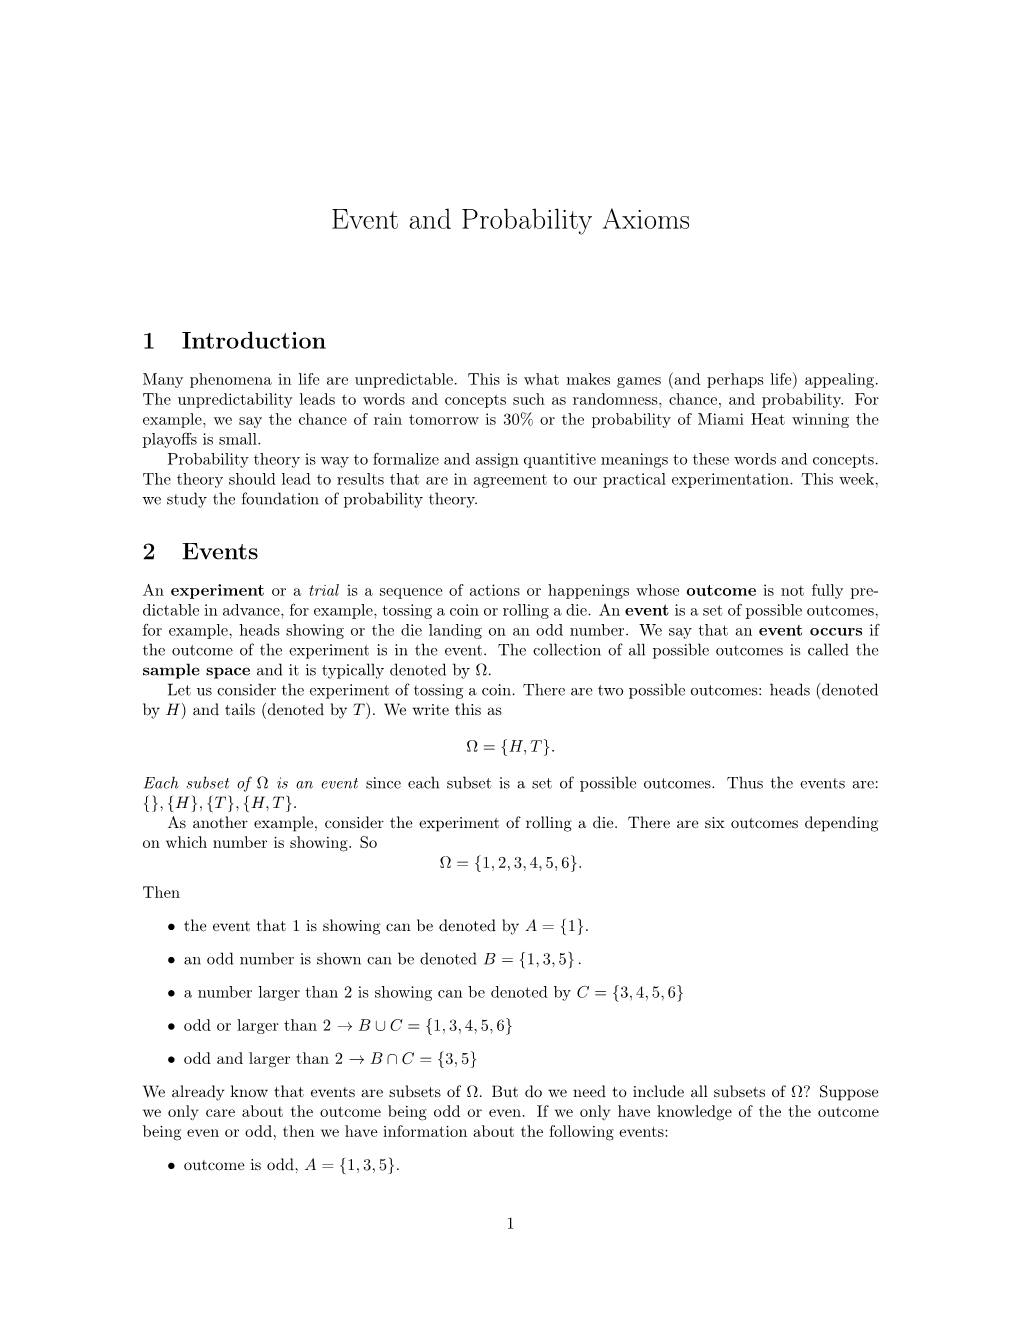 Notes on Event and Probability Axioms